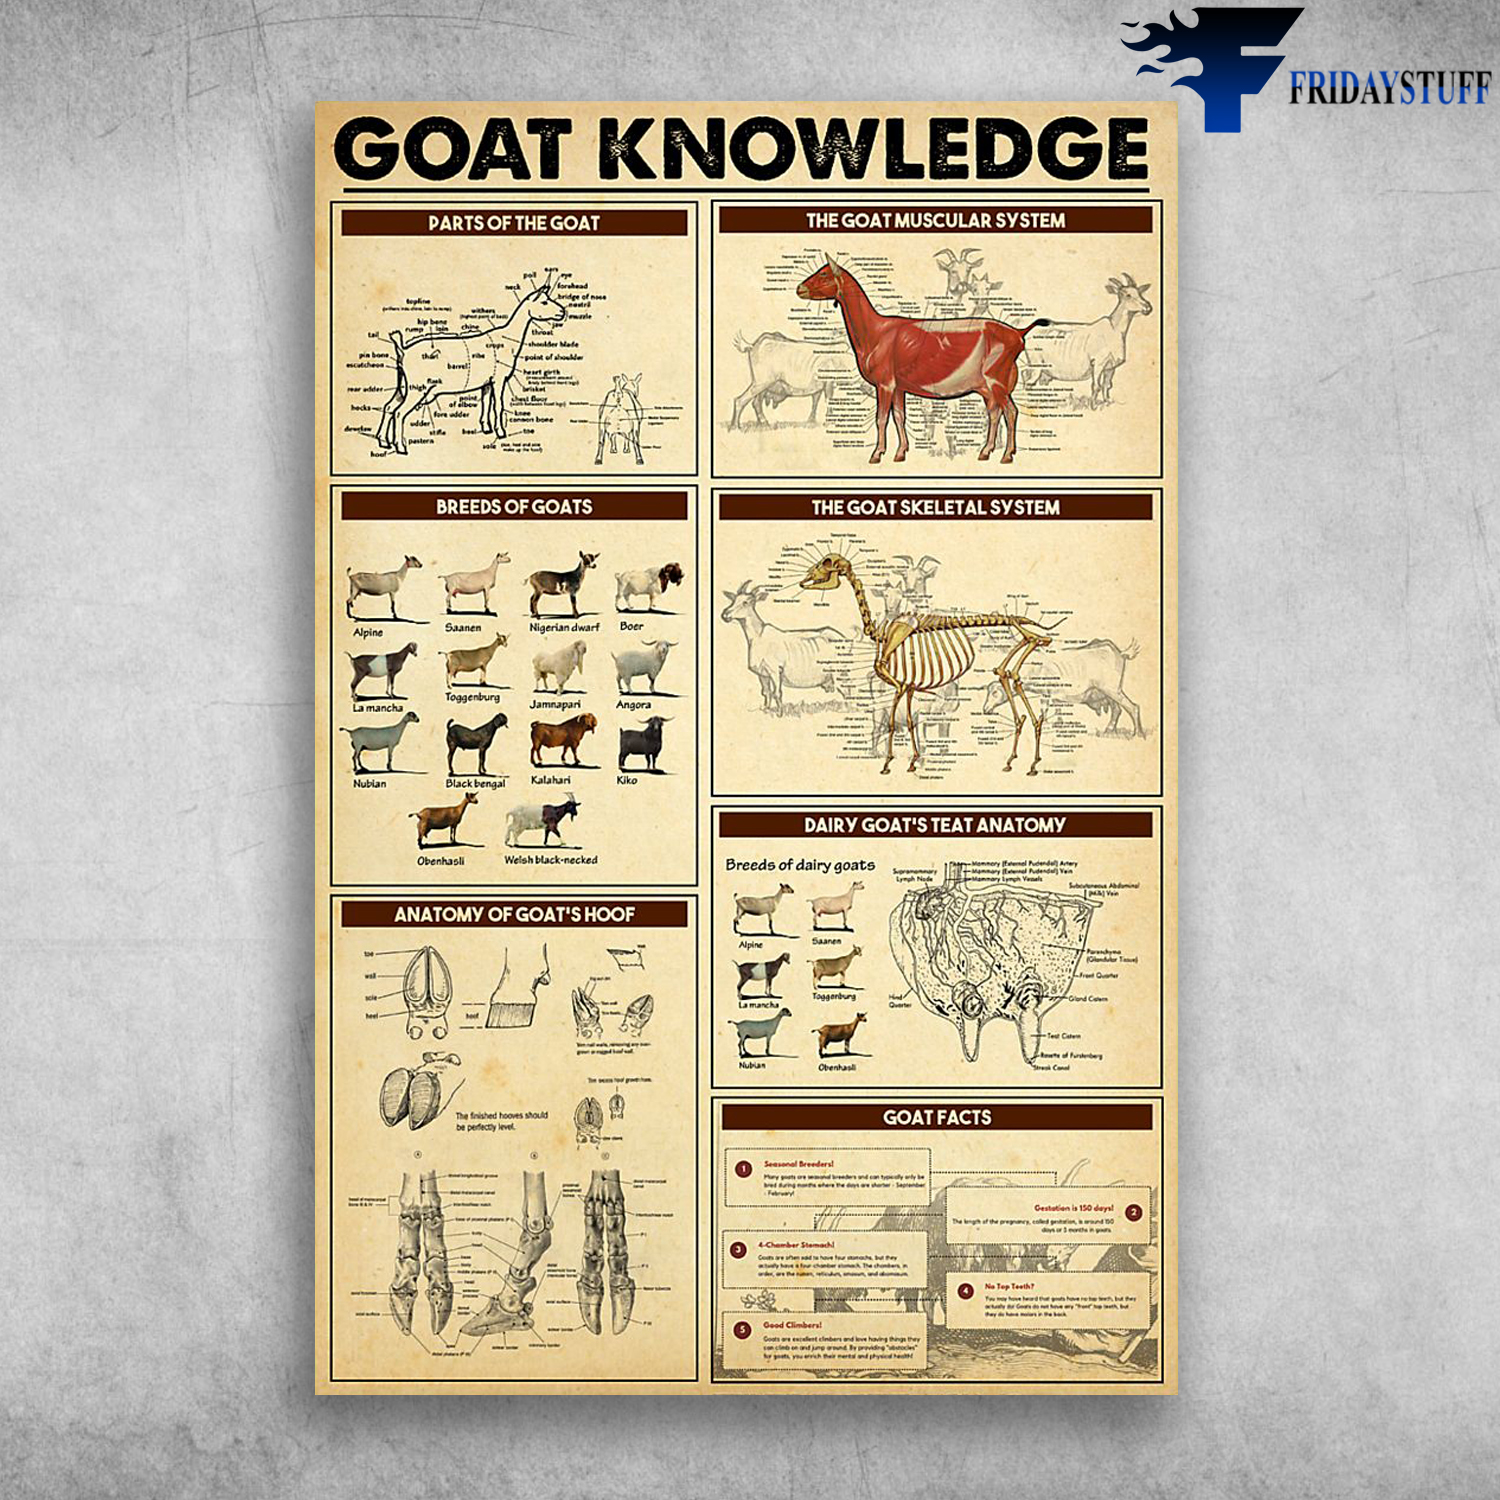 Goat Knowledge Parts Of The Goat Breeds Of Goats